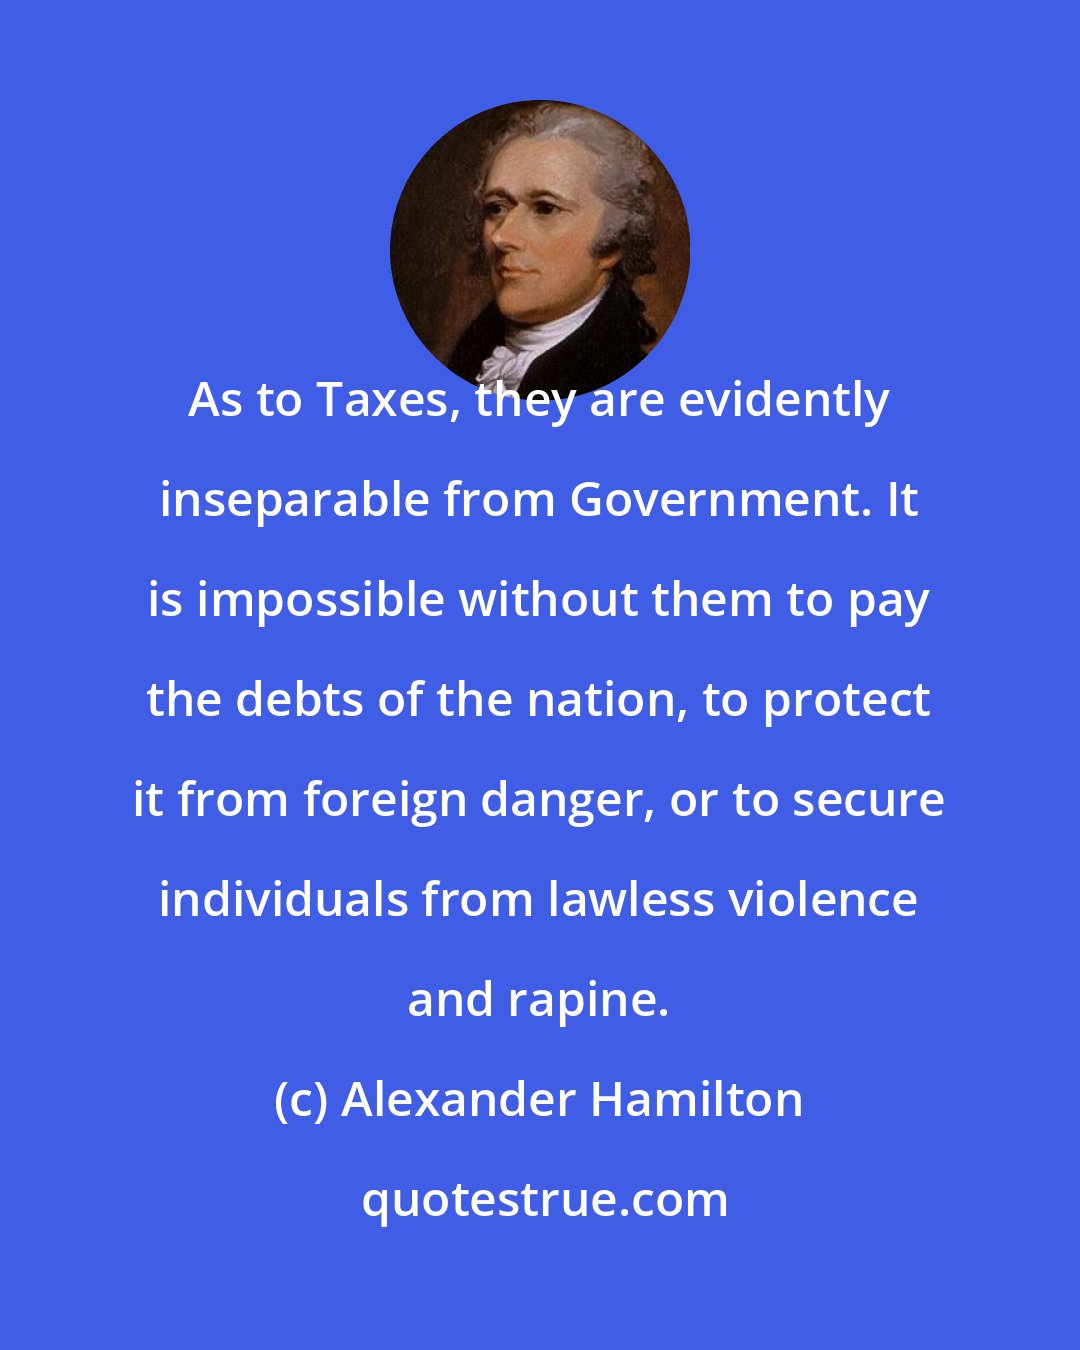 Alexander Hamilton: As to Taxes, they are evidently inseparable from Government. It is impossible without them to pay the debts of the nation, to protect it from foreign danger, or to secure individuals from lawless violence and rapine.